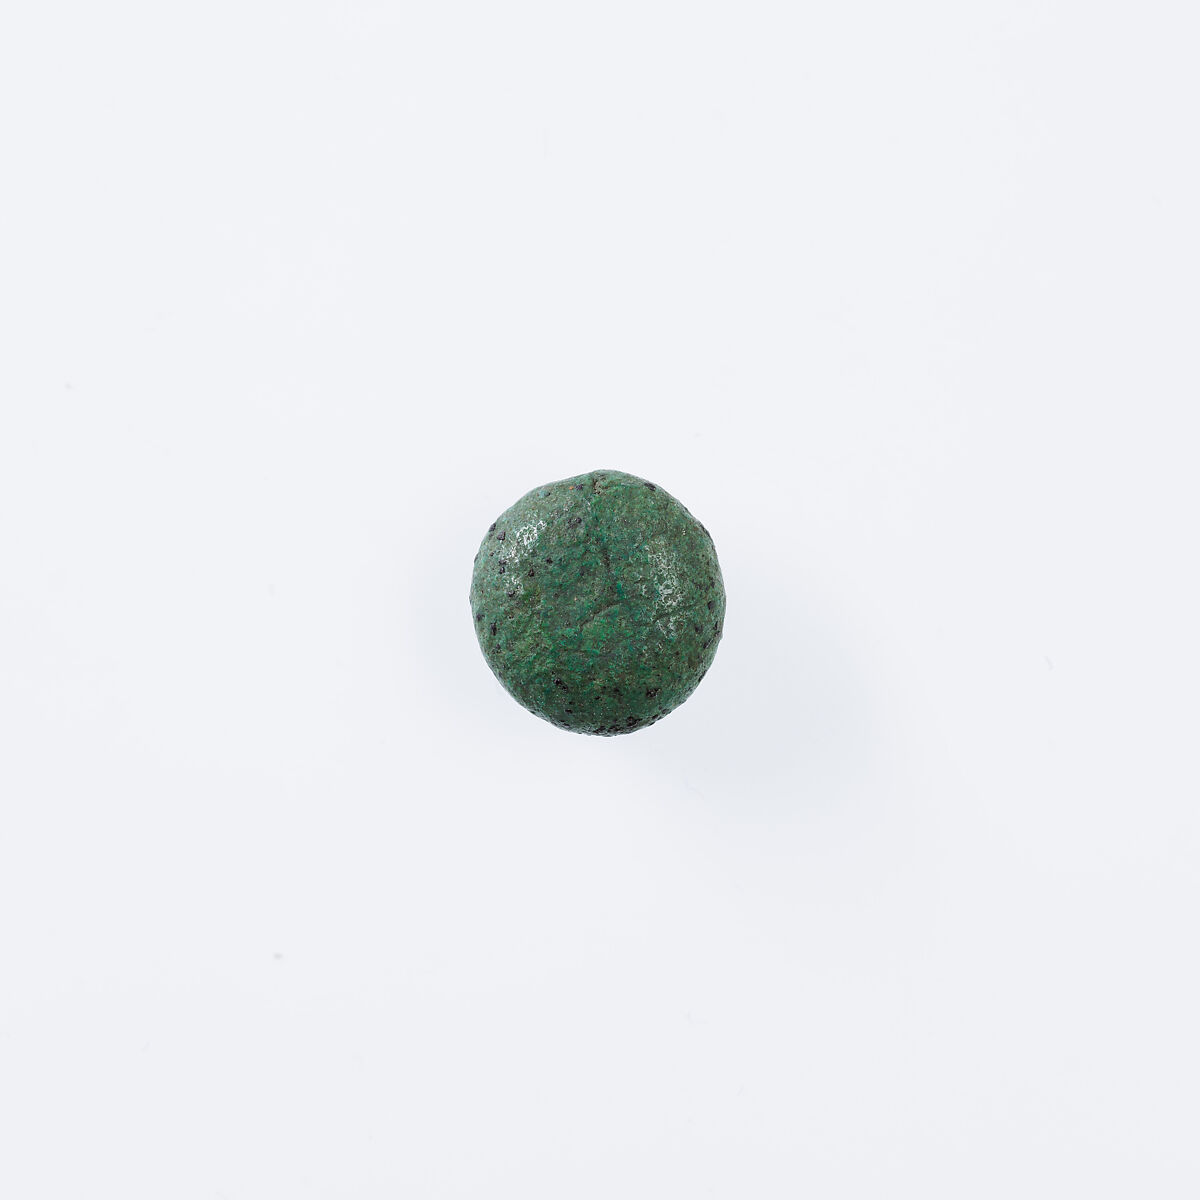 Weight, Copper alloy 